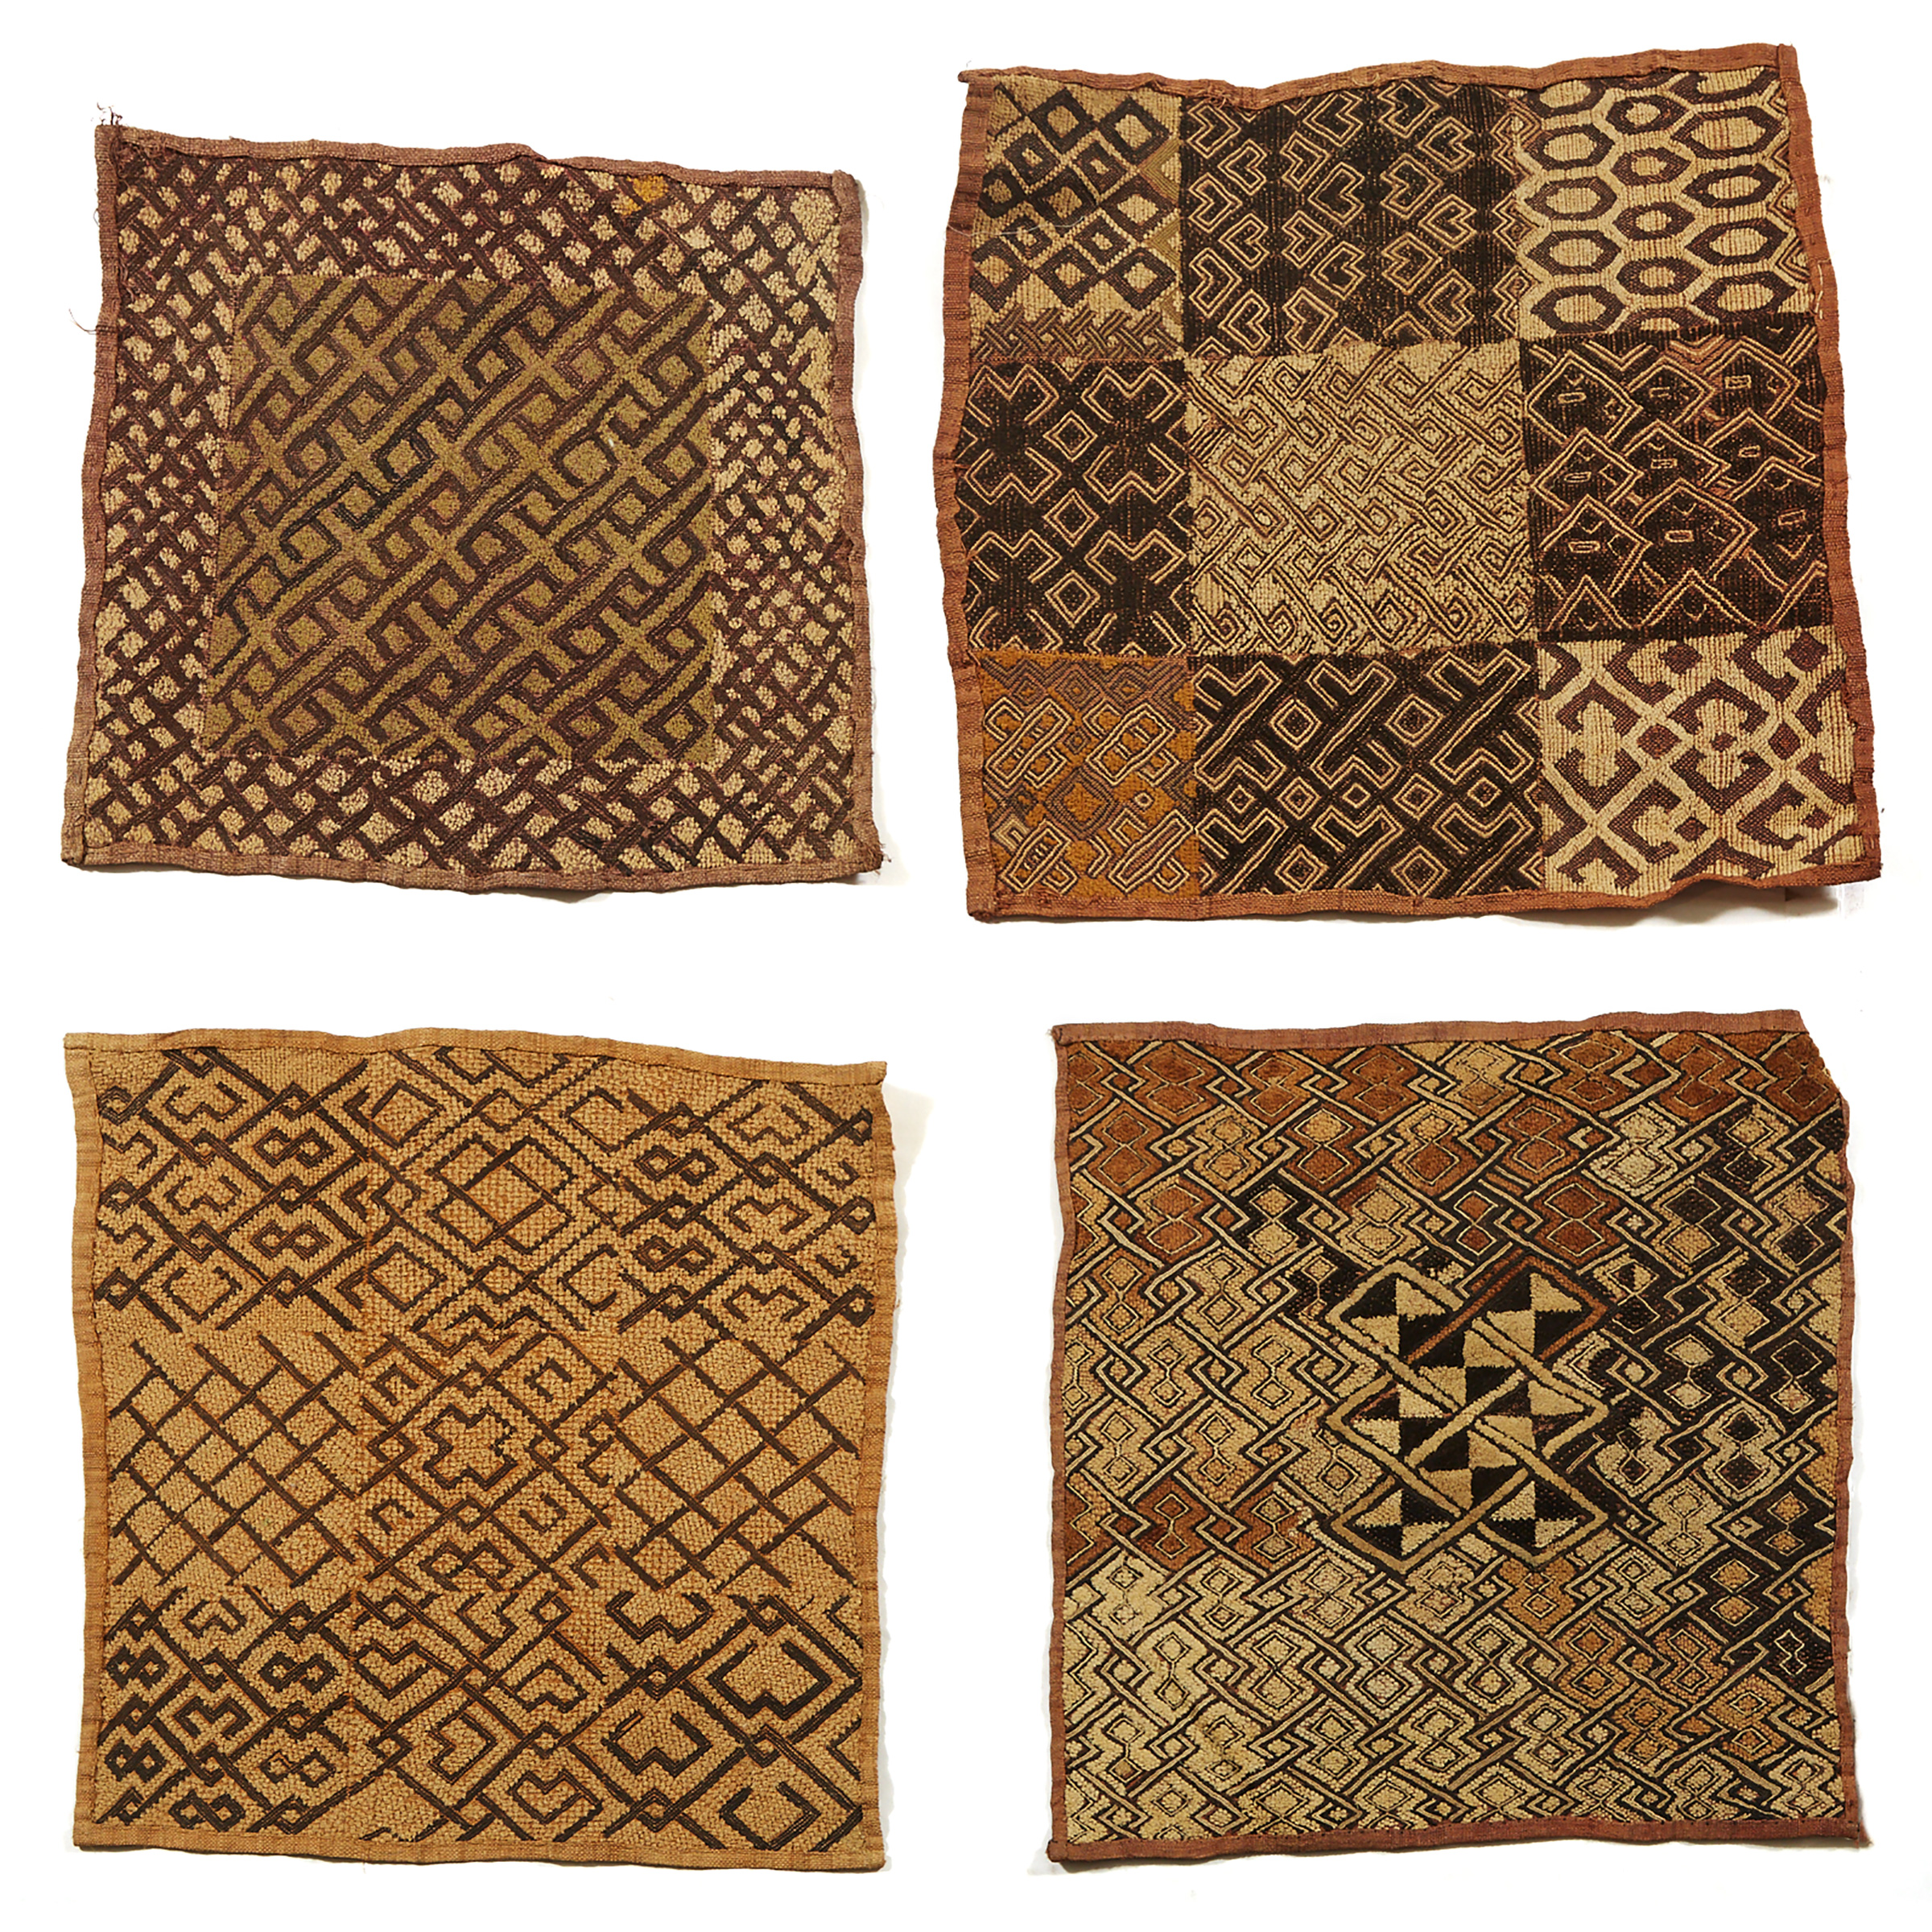 A Group of Four Kuba Woven Raffia Mats, early to mid 20th century